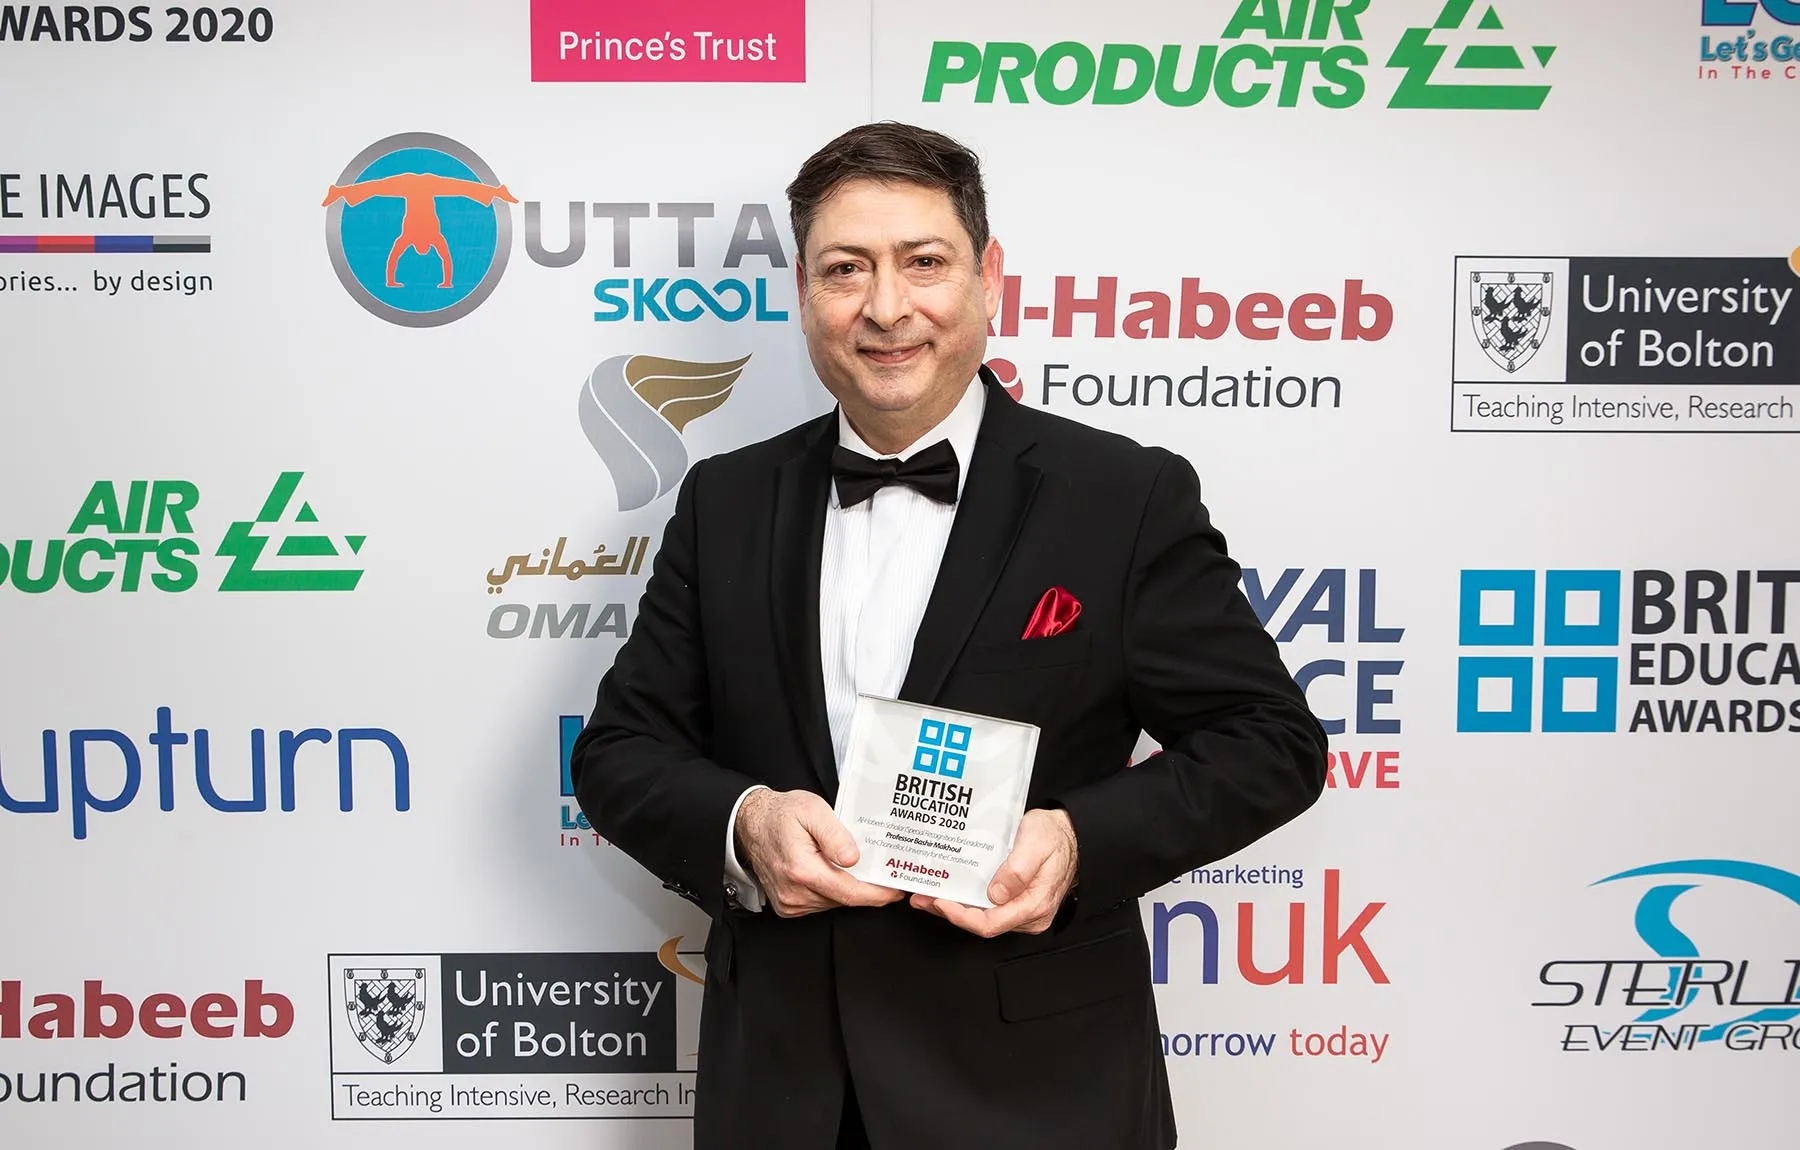 Vice-Chacellor Professor Makhoul with his Award at the British Education Awards